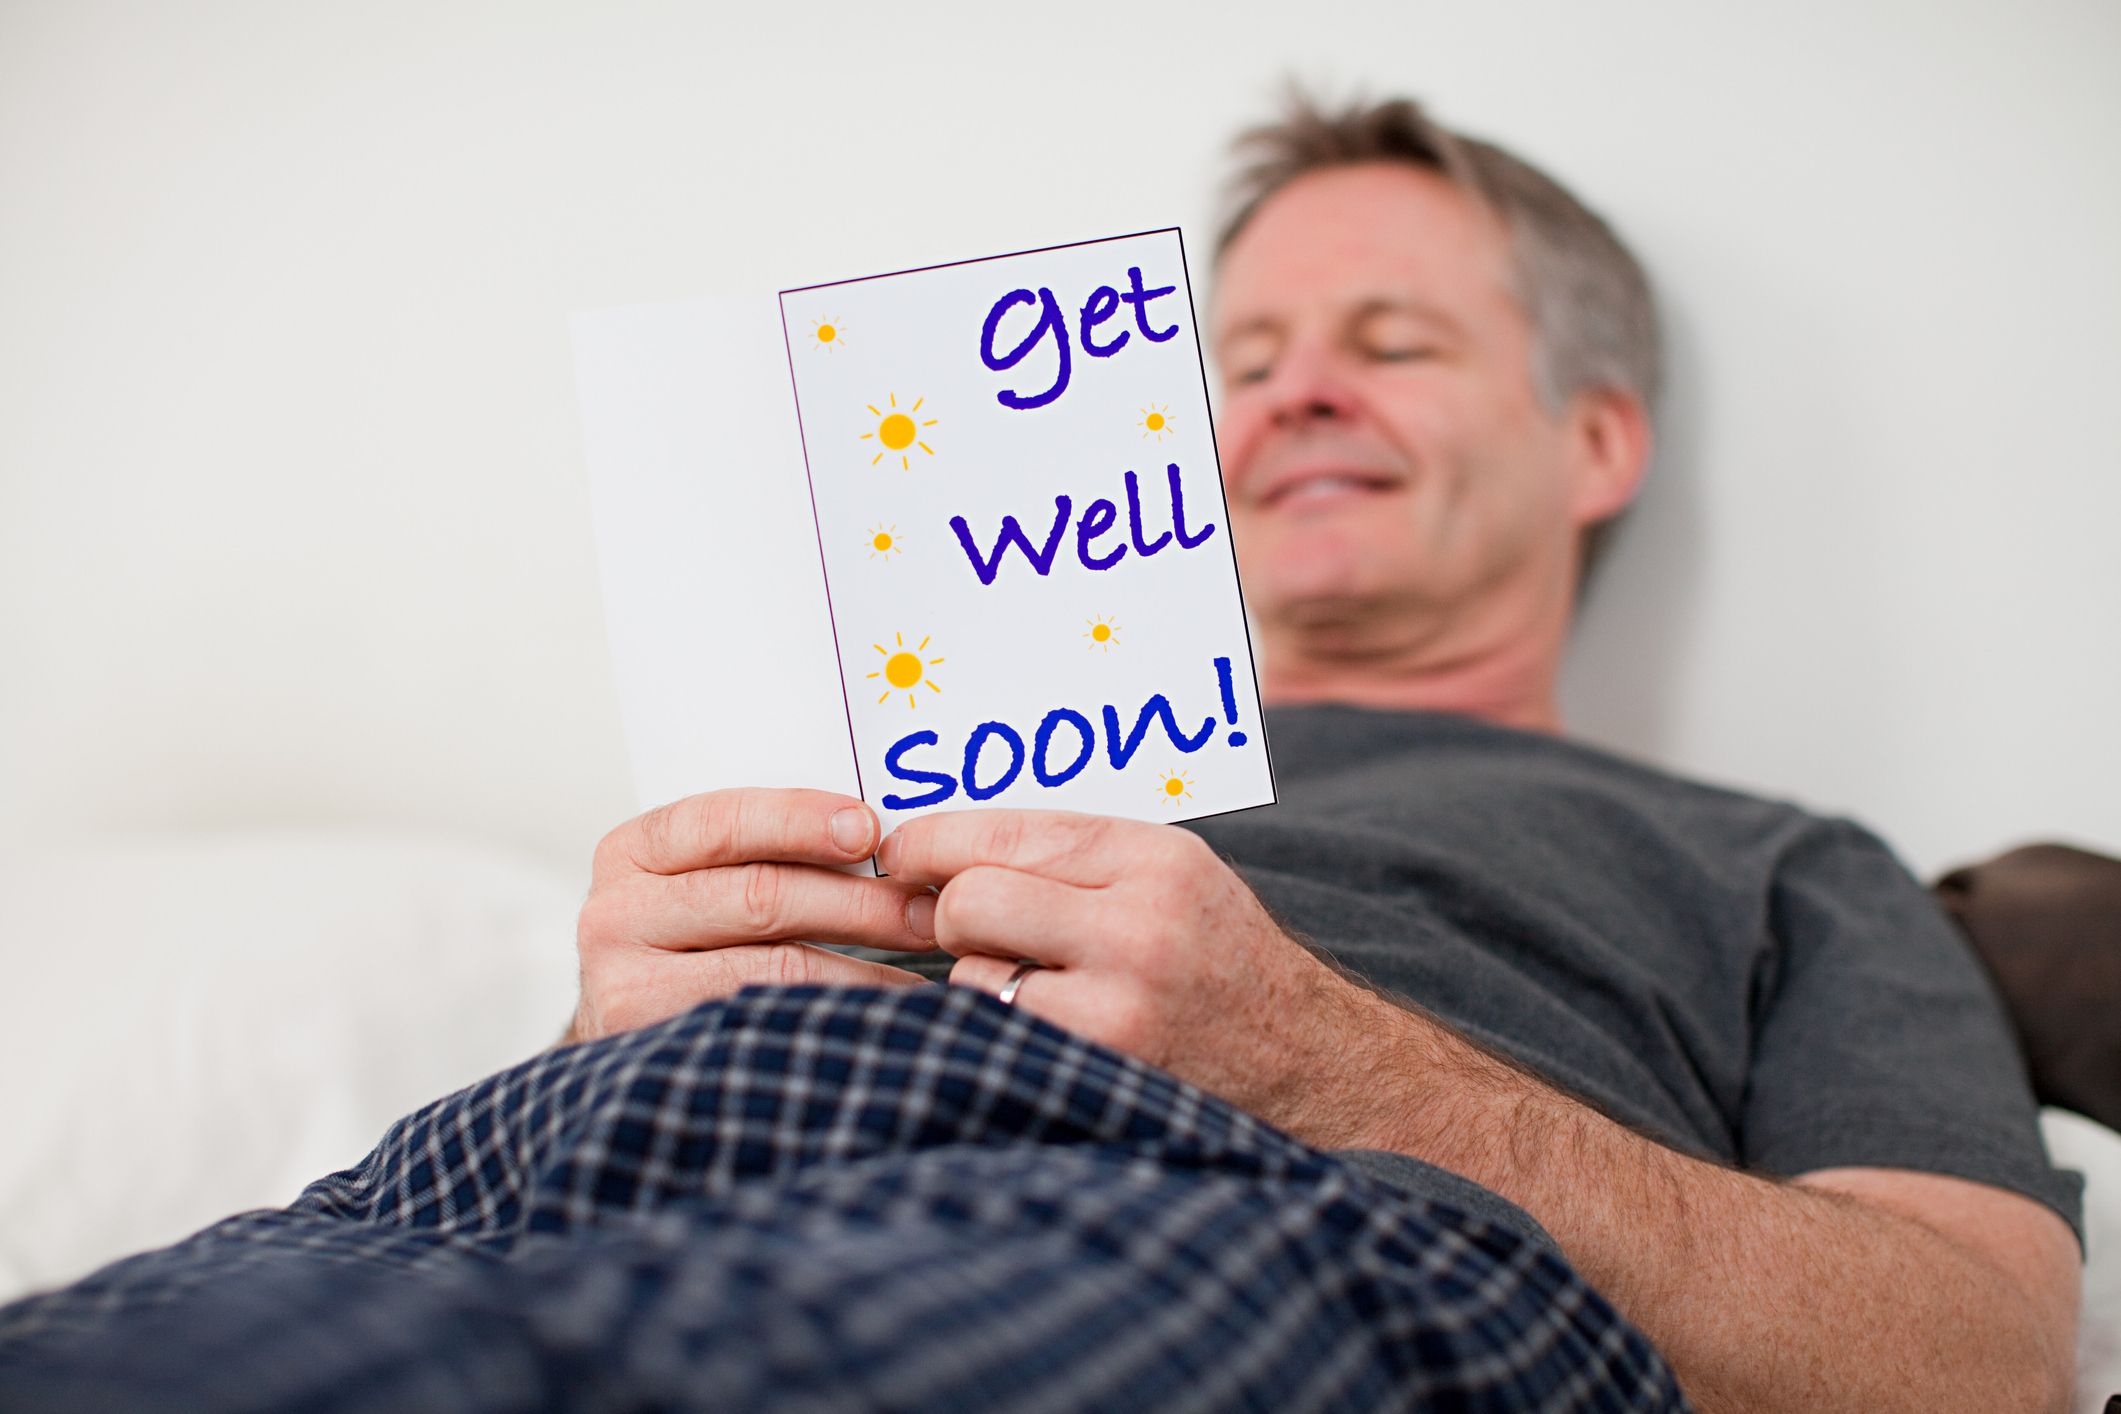 100 Get Well Soon Wishes & Messages to Show How Much You Care